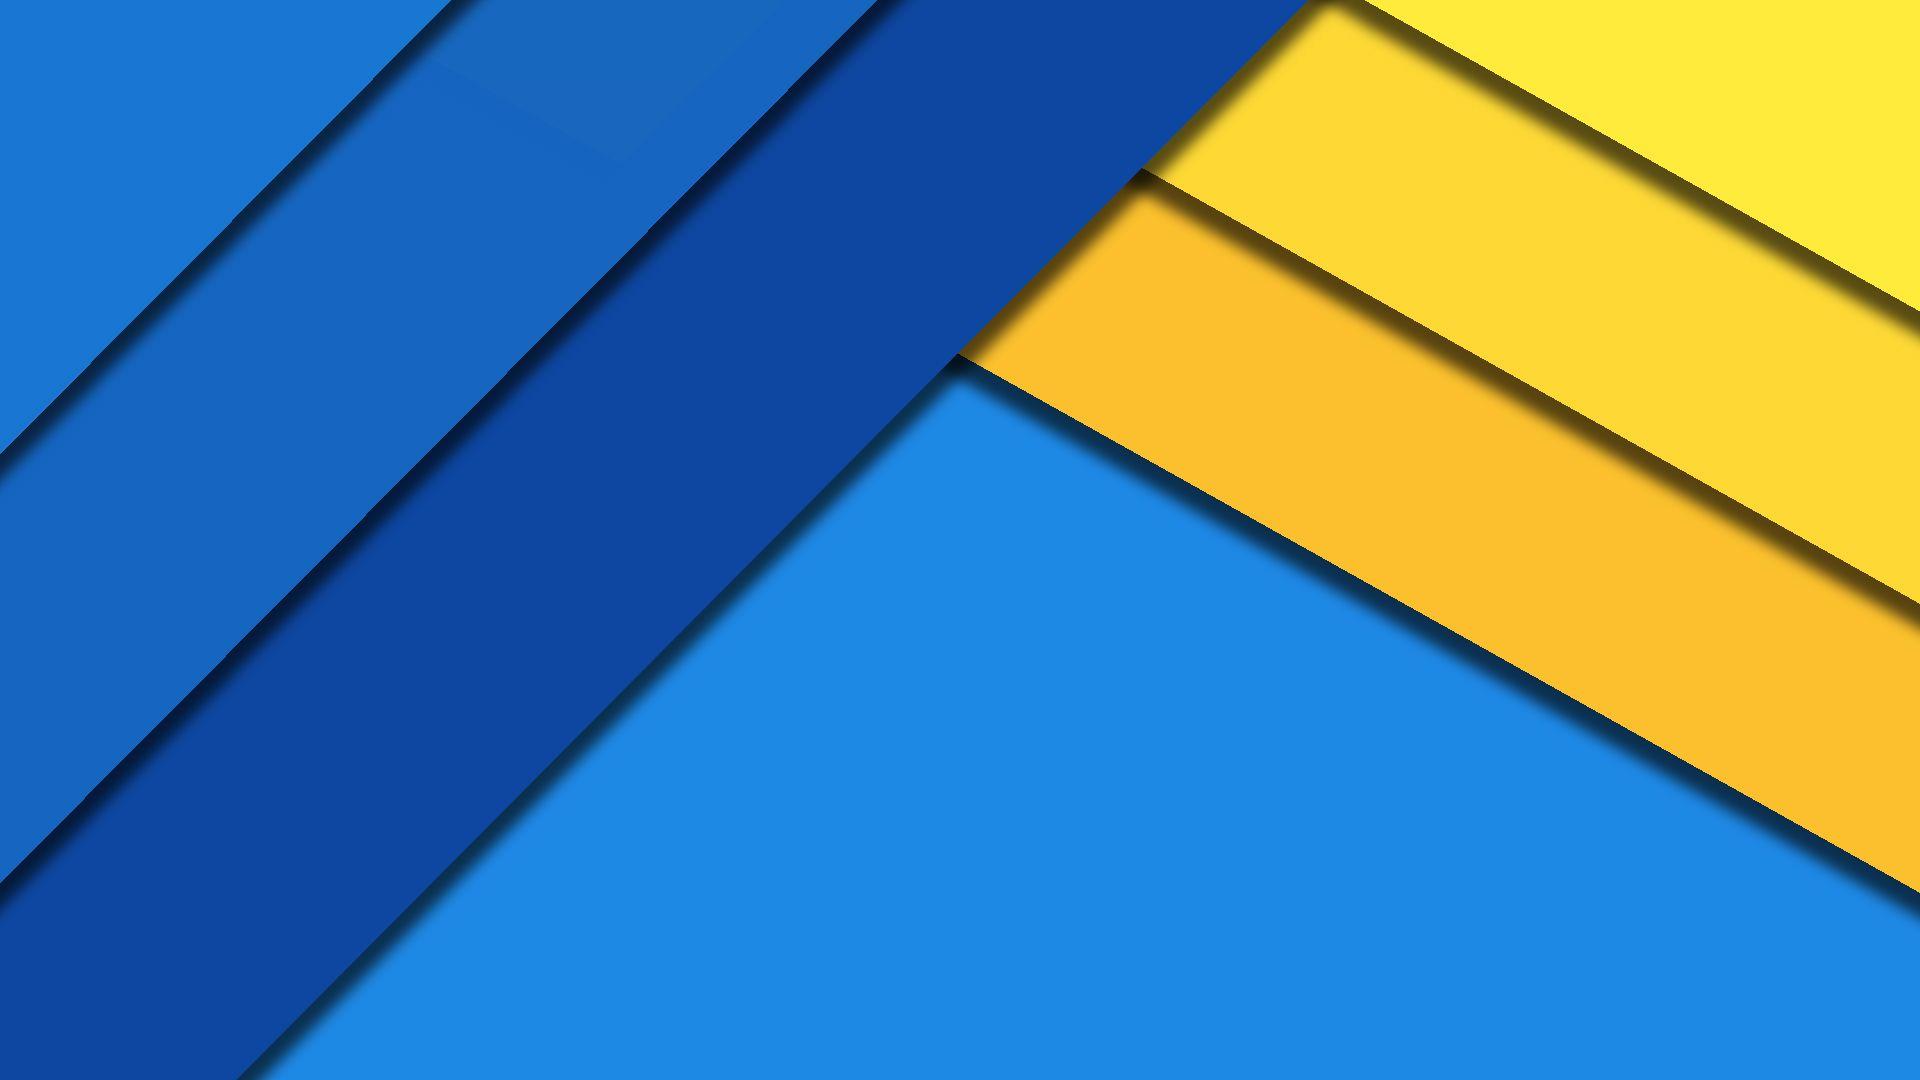 Blue And Yellow Wallpapers - Wallpaper Cave